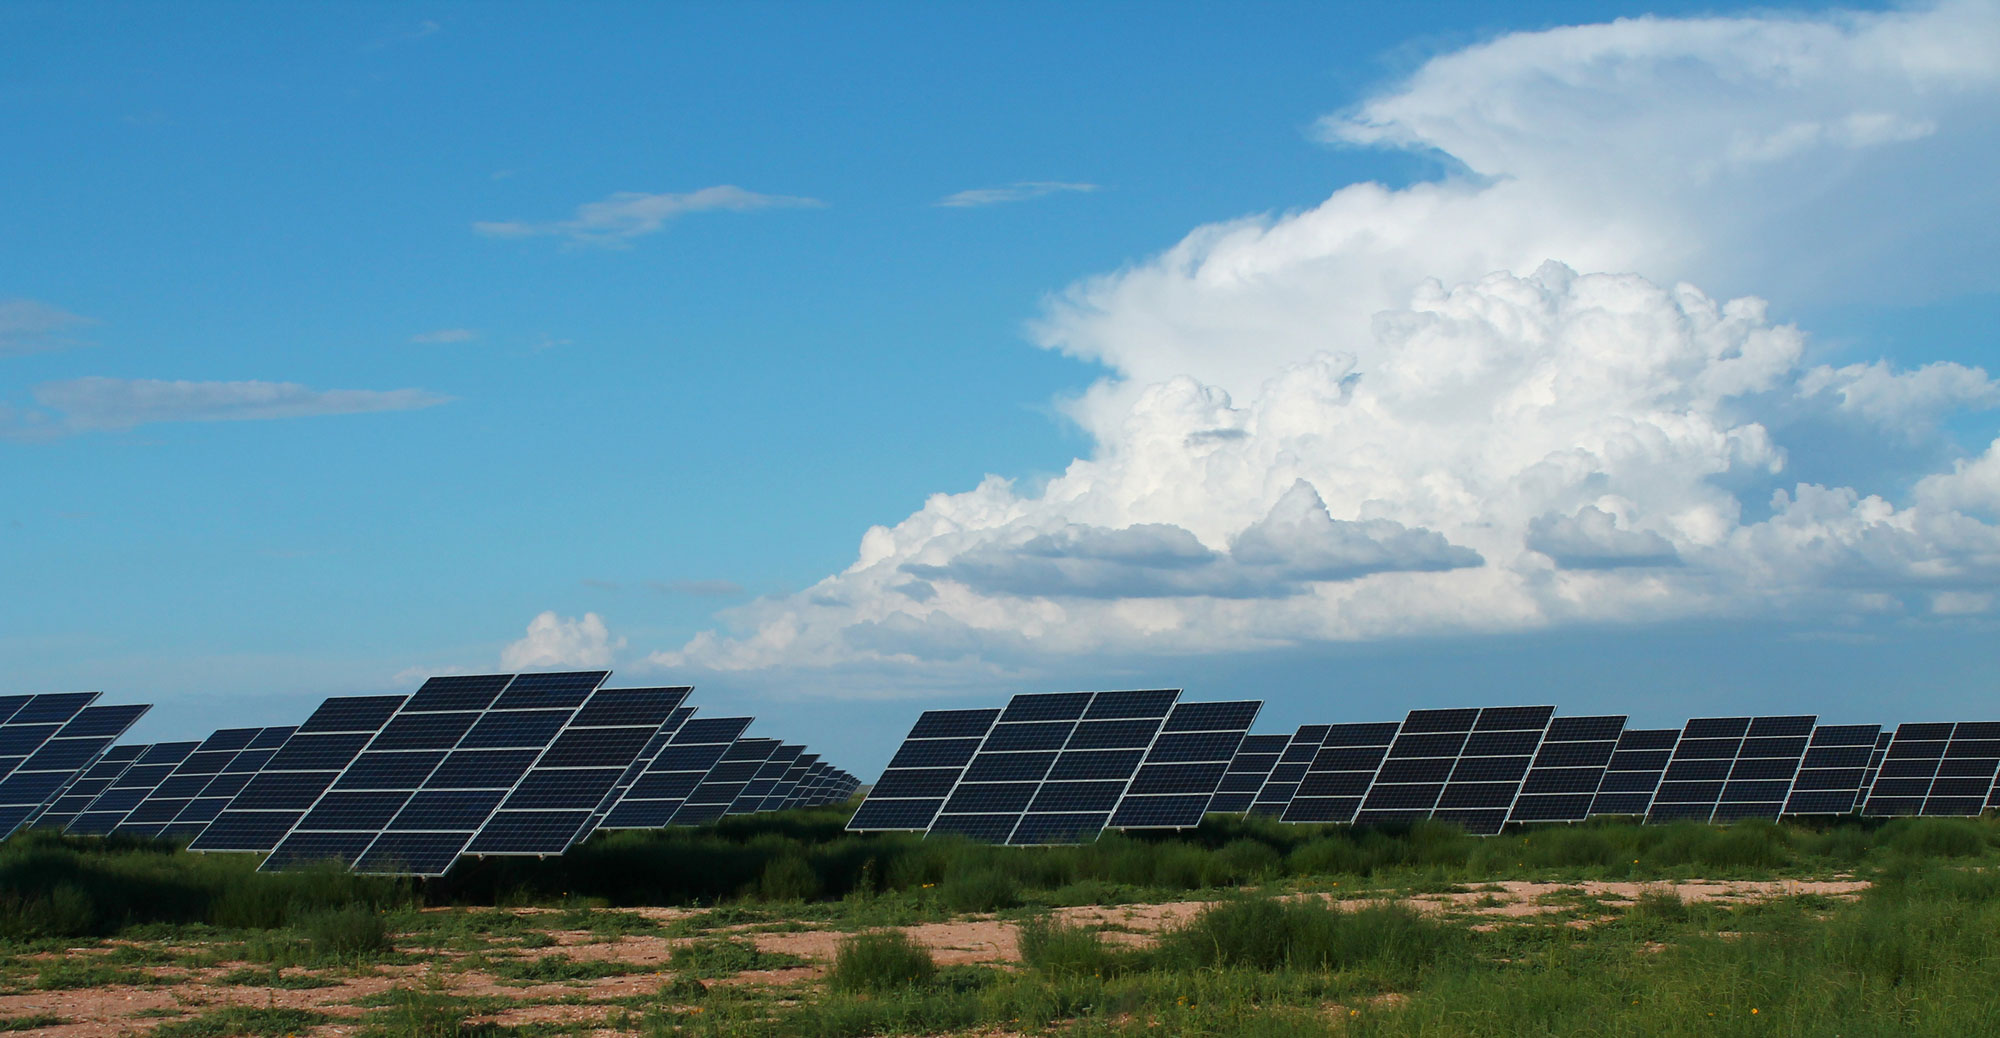 Photograph of a solar array in New Mexico. The photo shows multiple flat, black solar panels in a field with vegetation and some barren soil.